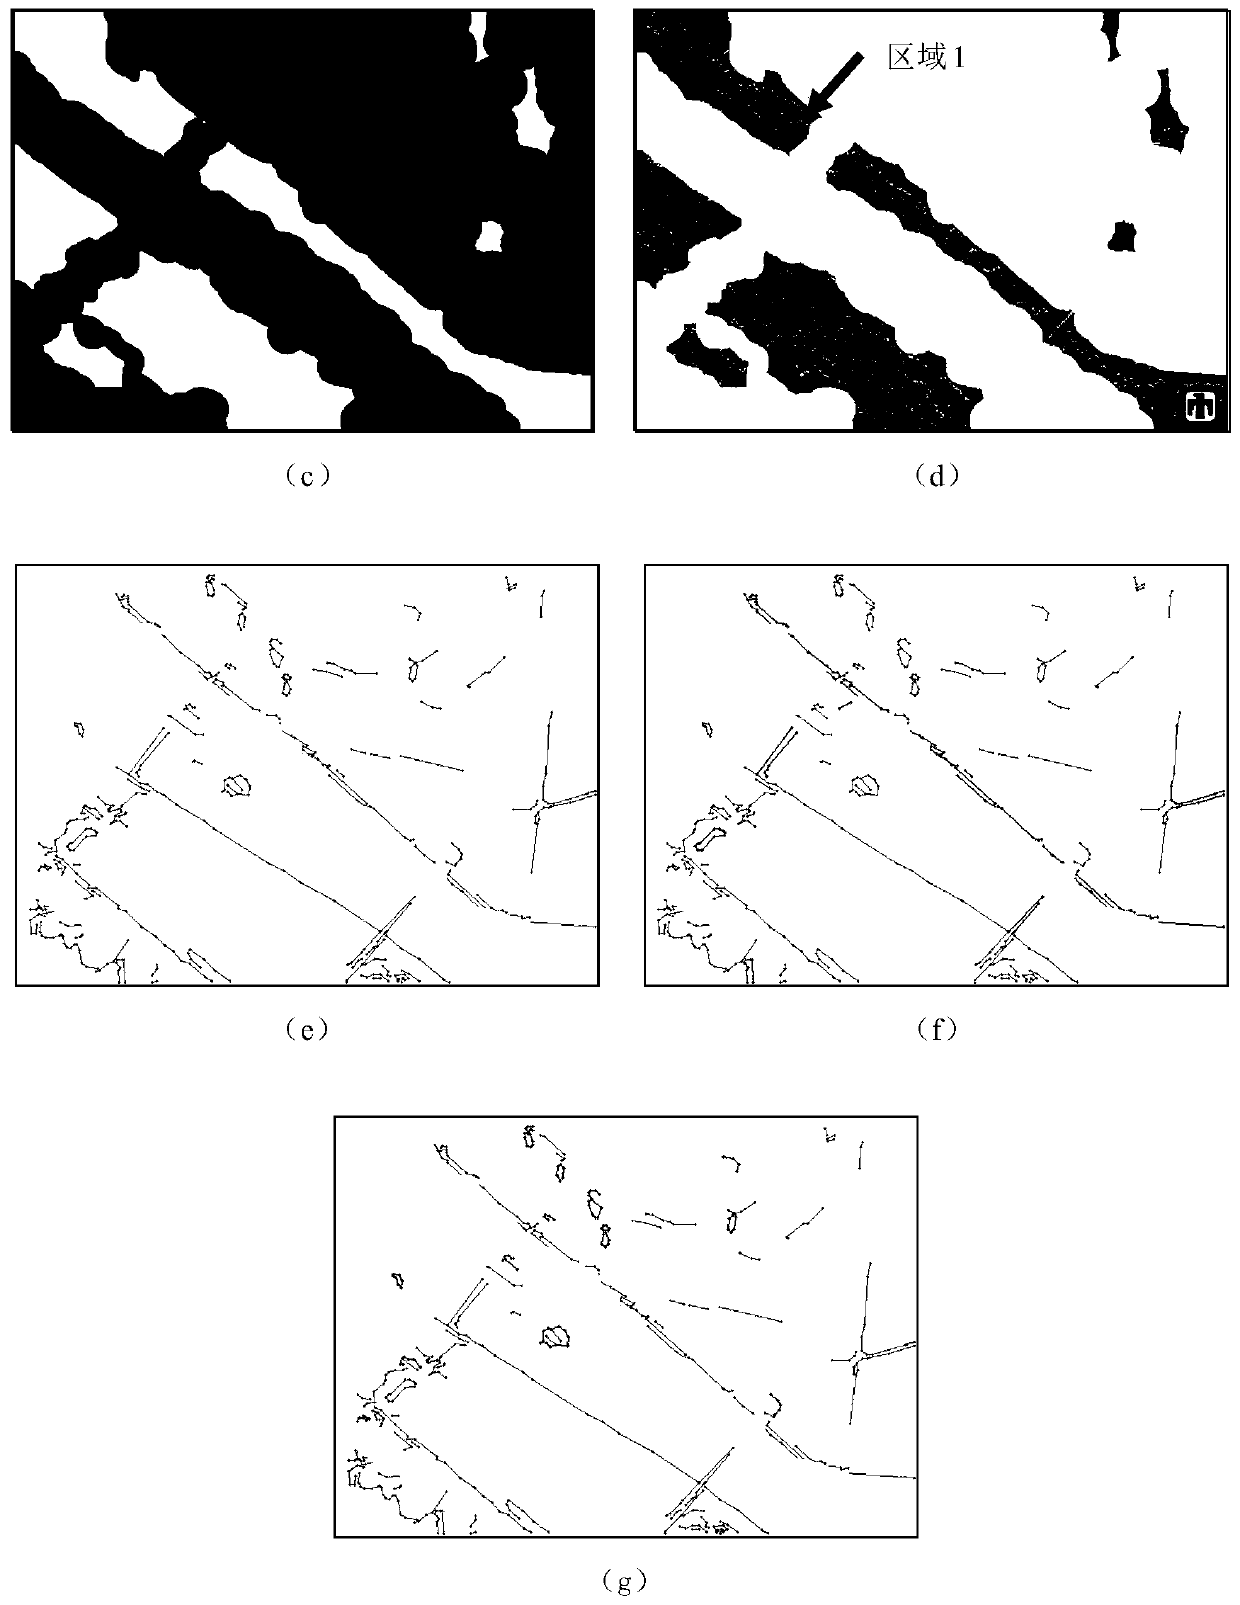 SAR Image Segmentation Method Based on Feature Learning and Sketch Line Segment Constraint